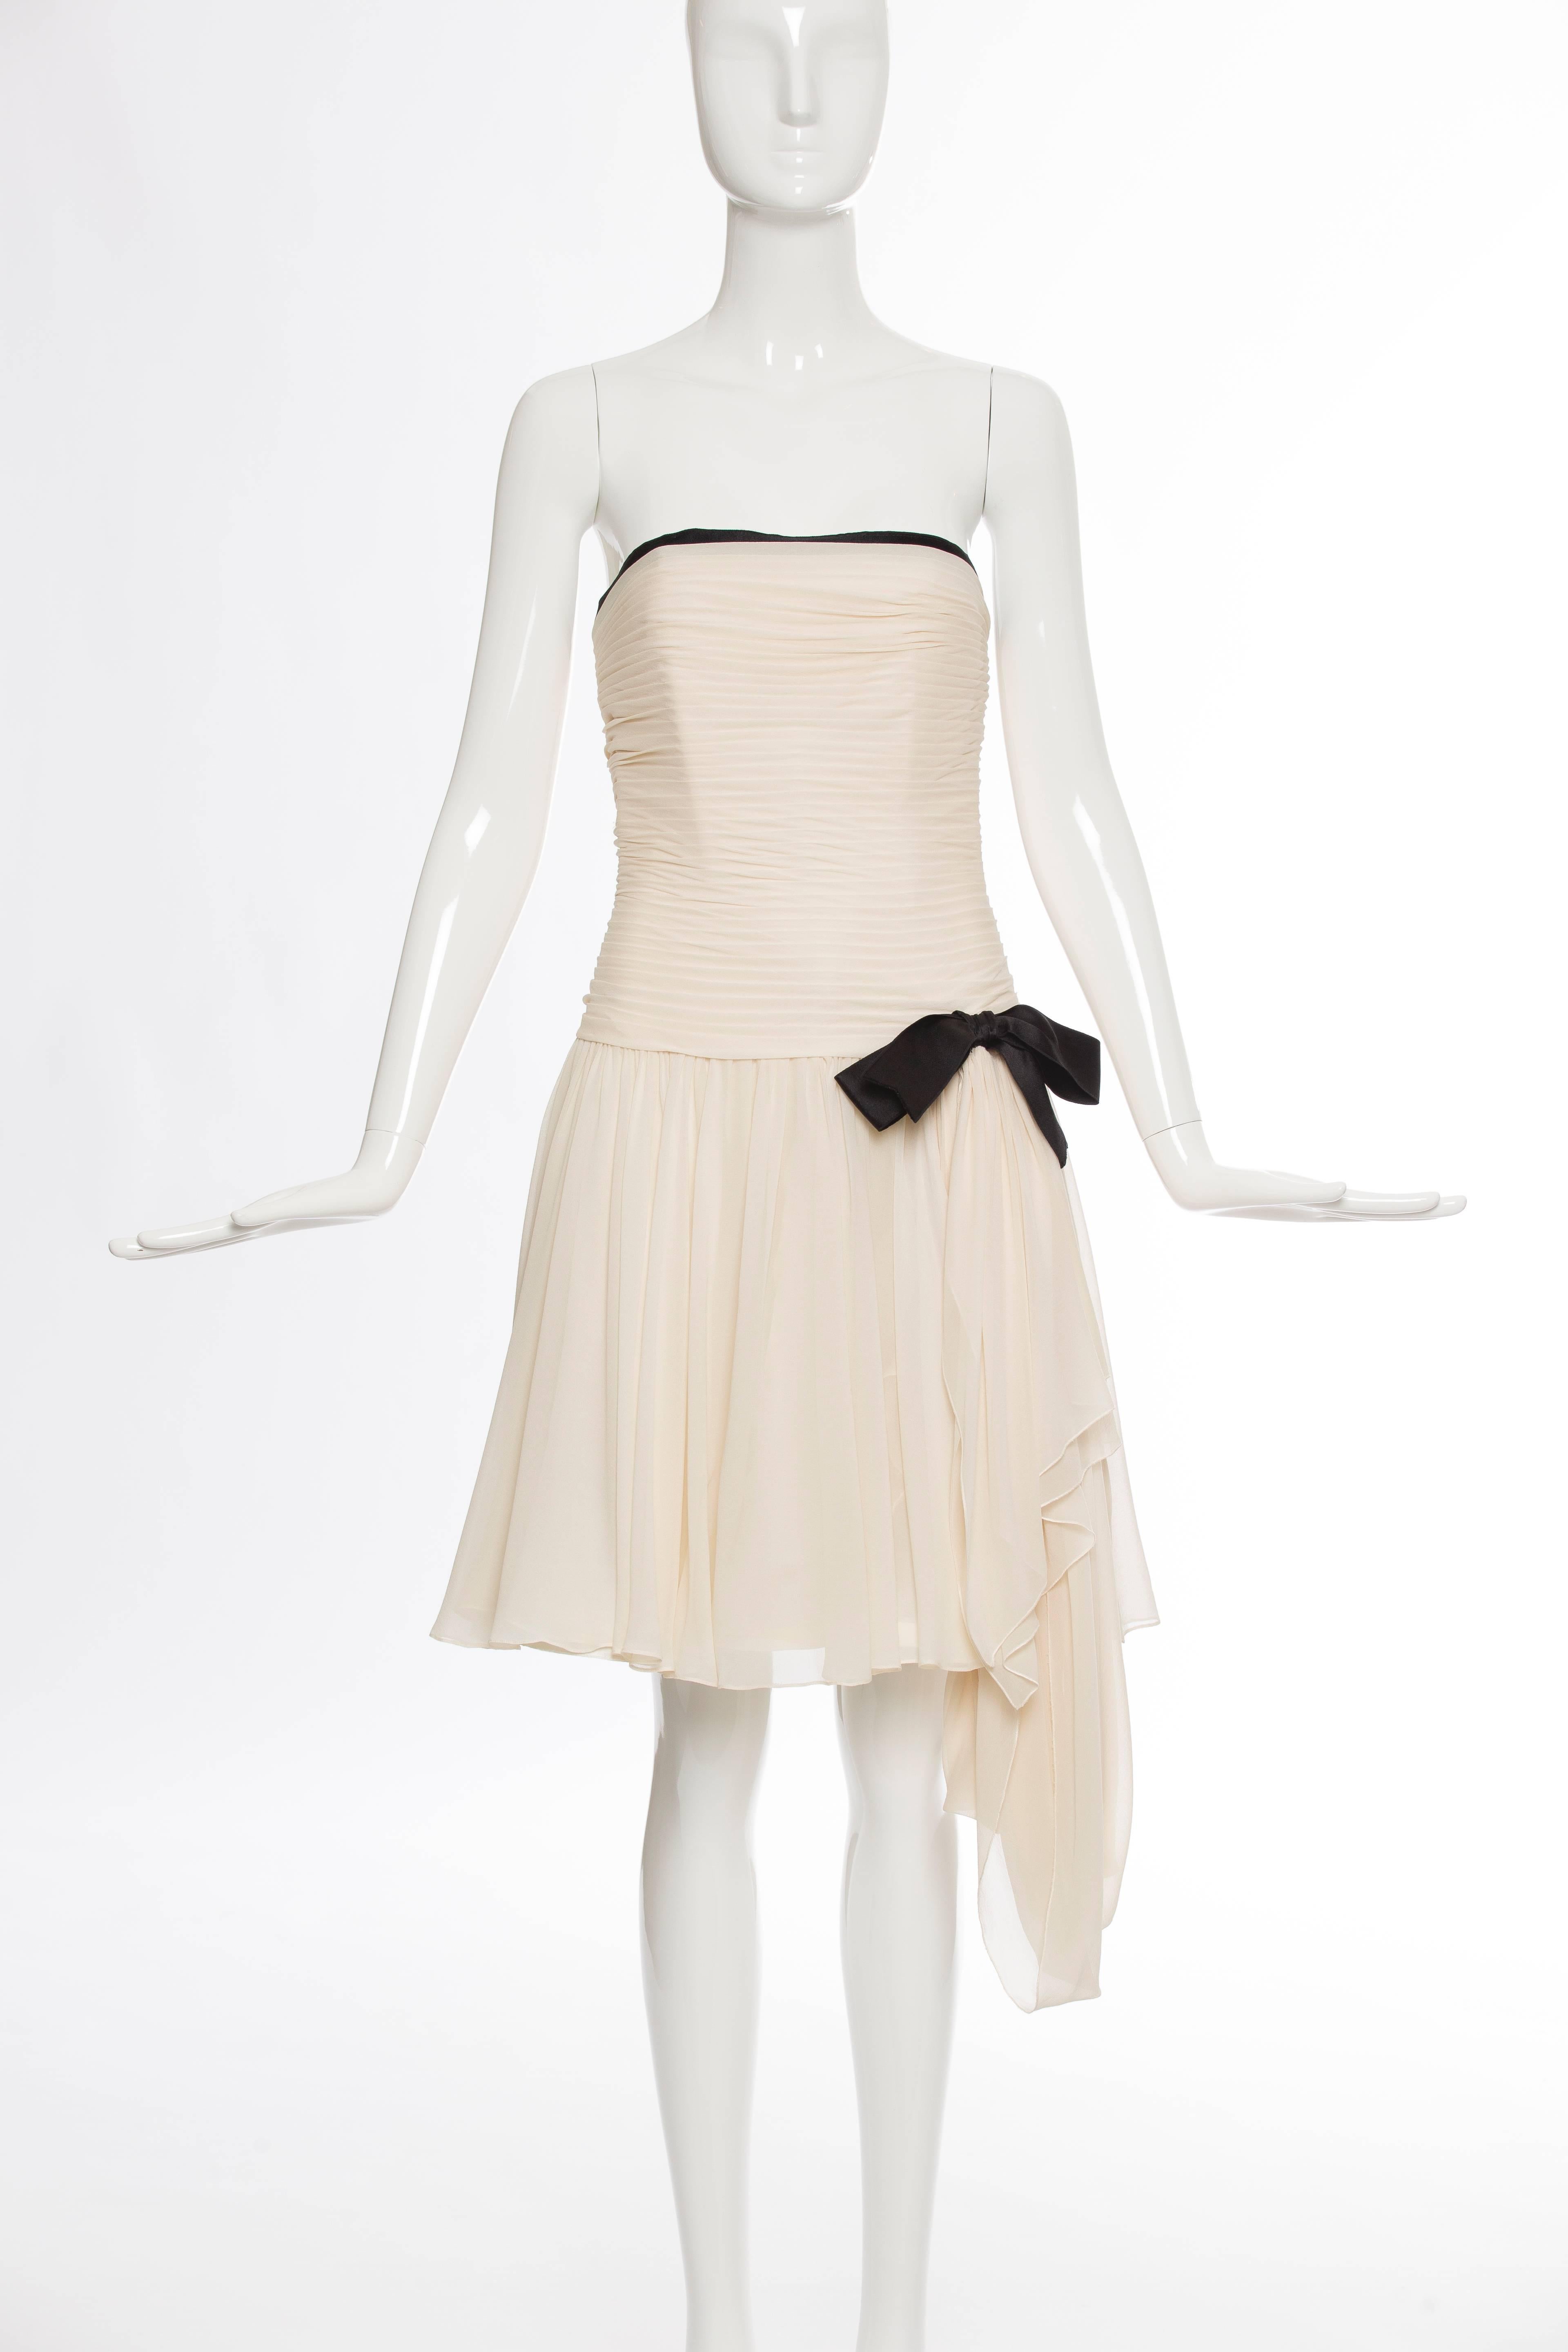 Chanel, circa 1980s, silk chiffon strapless dress with fitted ruched bodice, pleats at skirt featuring black satin draped bow, back zip and gold-tone button closure.

French size 36, US. size 4
Bust 28